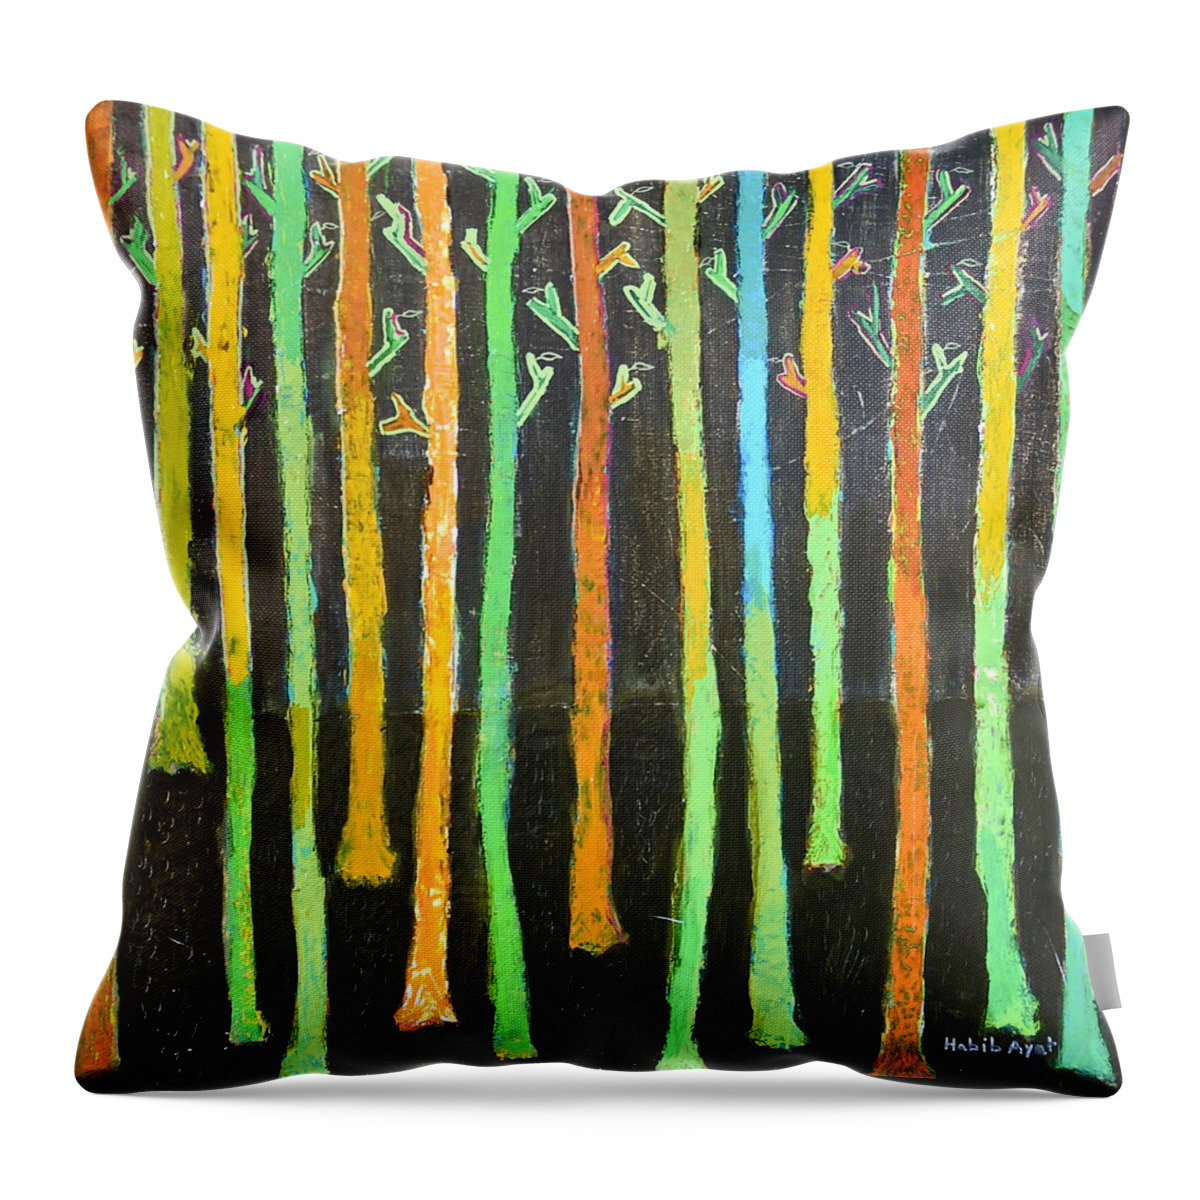 Colors Throw Pillow featuring the painting Colorful Trees by Habib Ayat